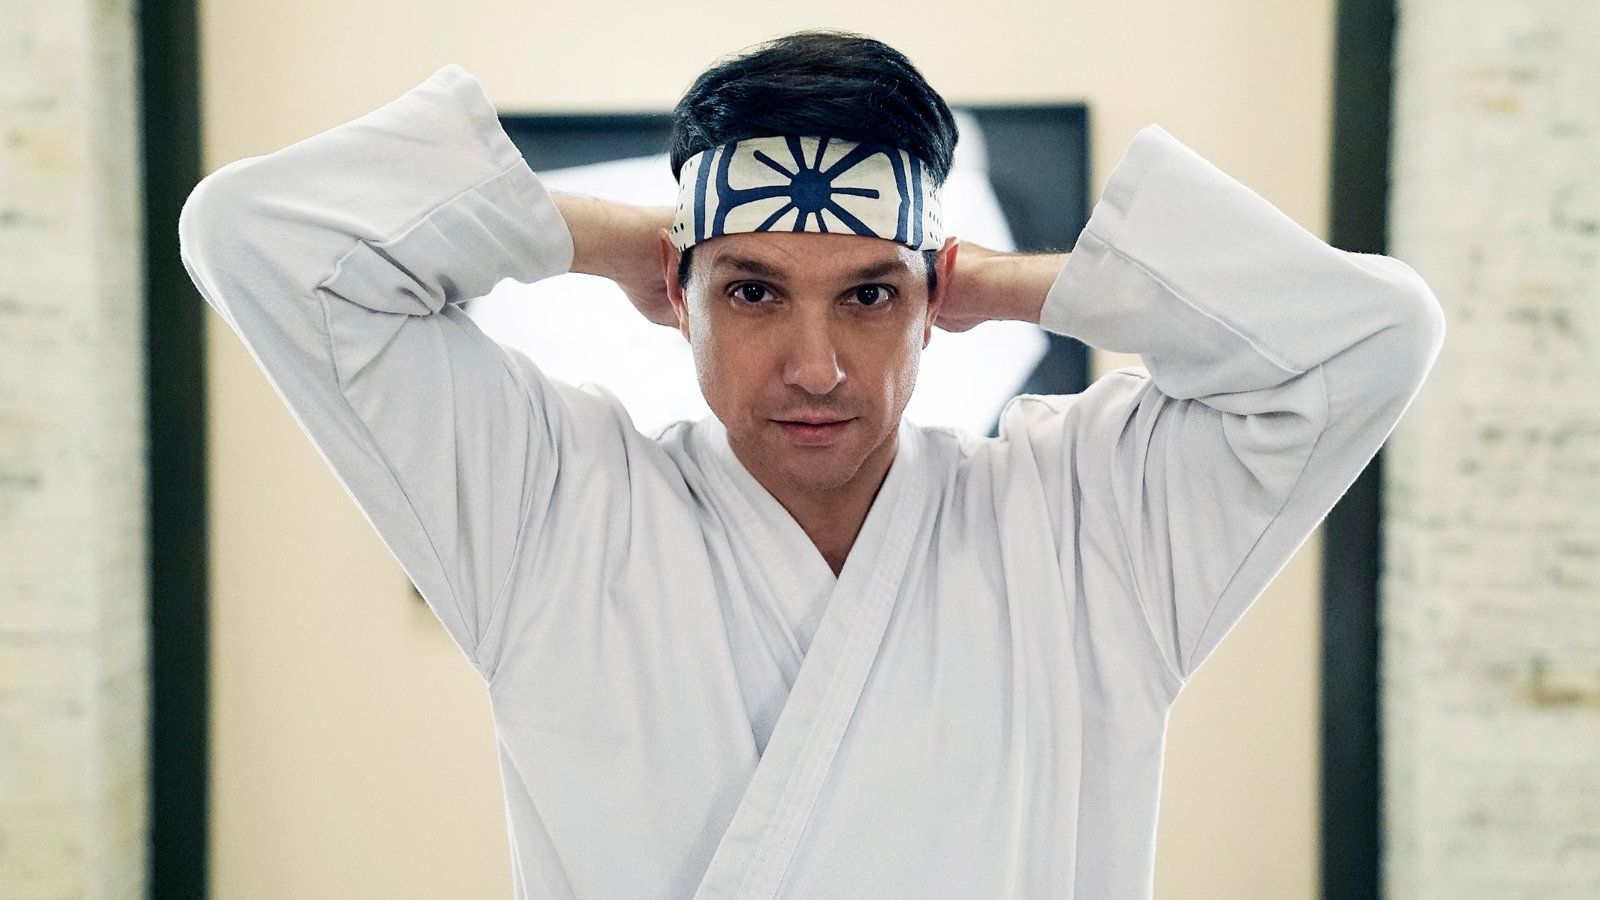 Cobra Kai': This Rivalry Is Not Quite Ready for a Body Bag